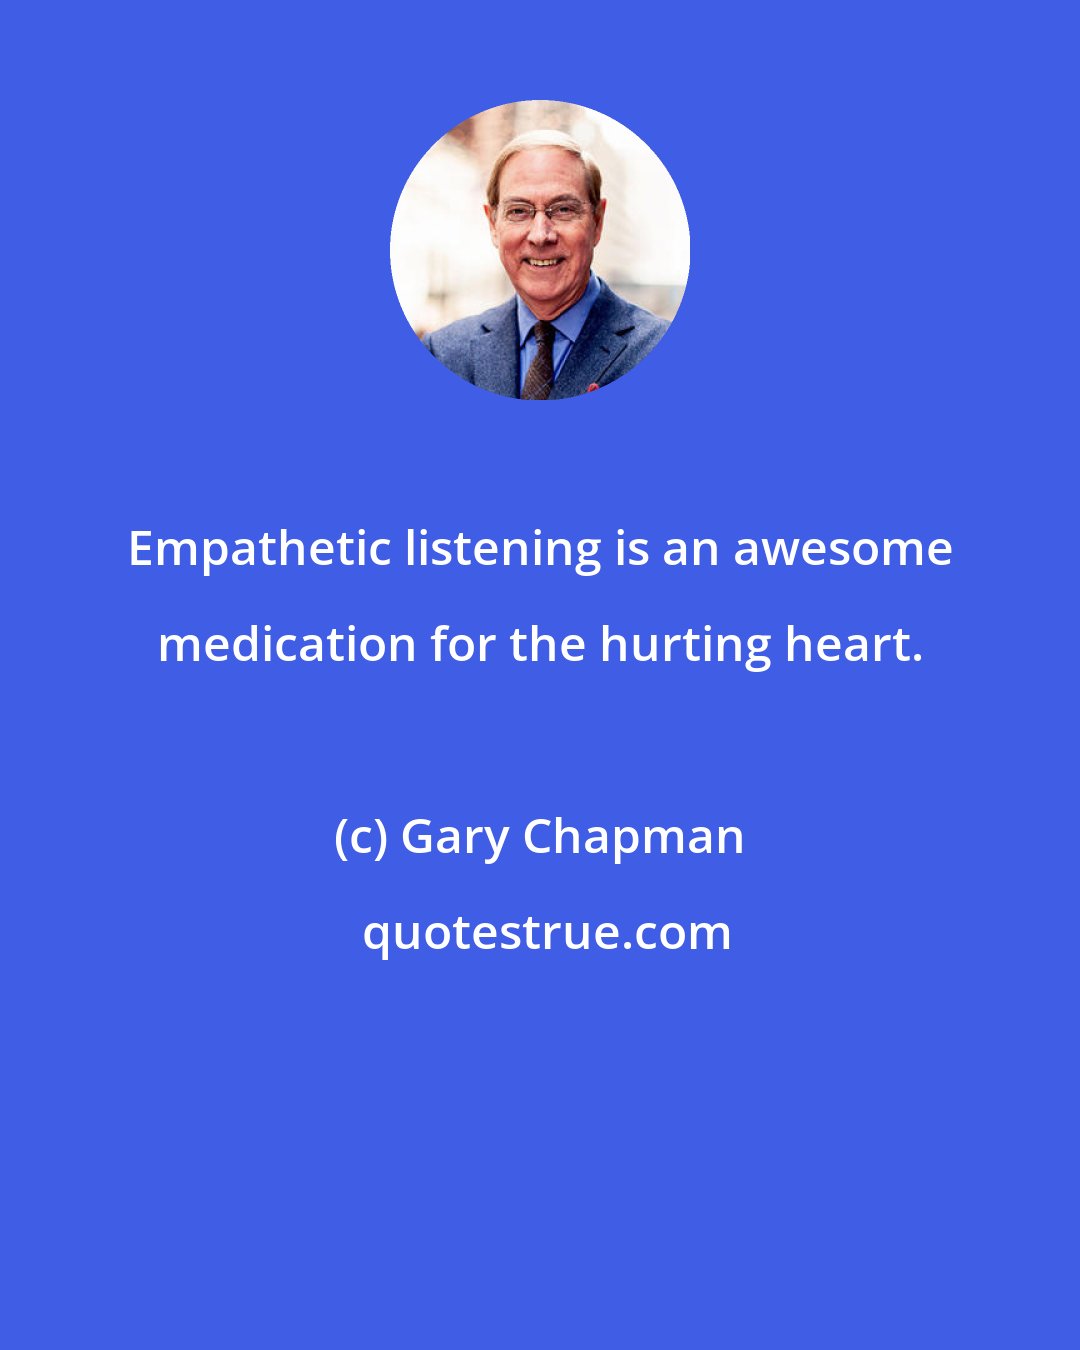 Gary Chapman: Empathetic listening is an awesome medication for the hurting heart.